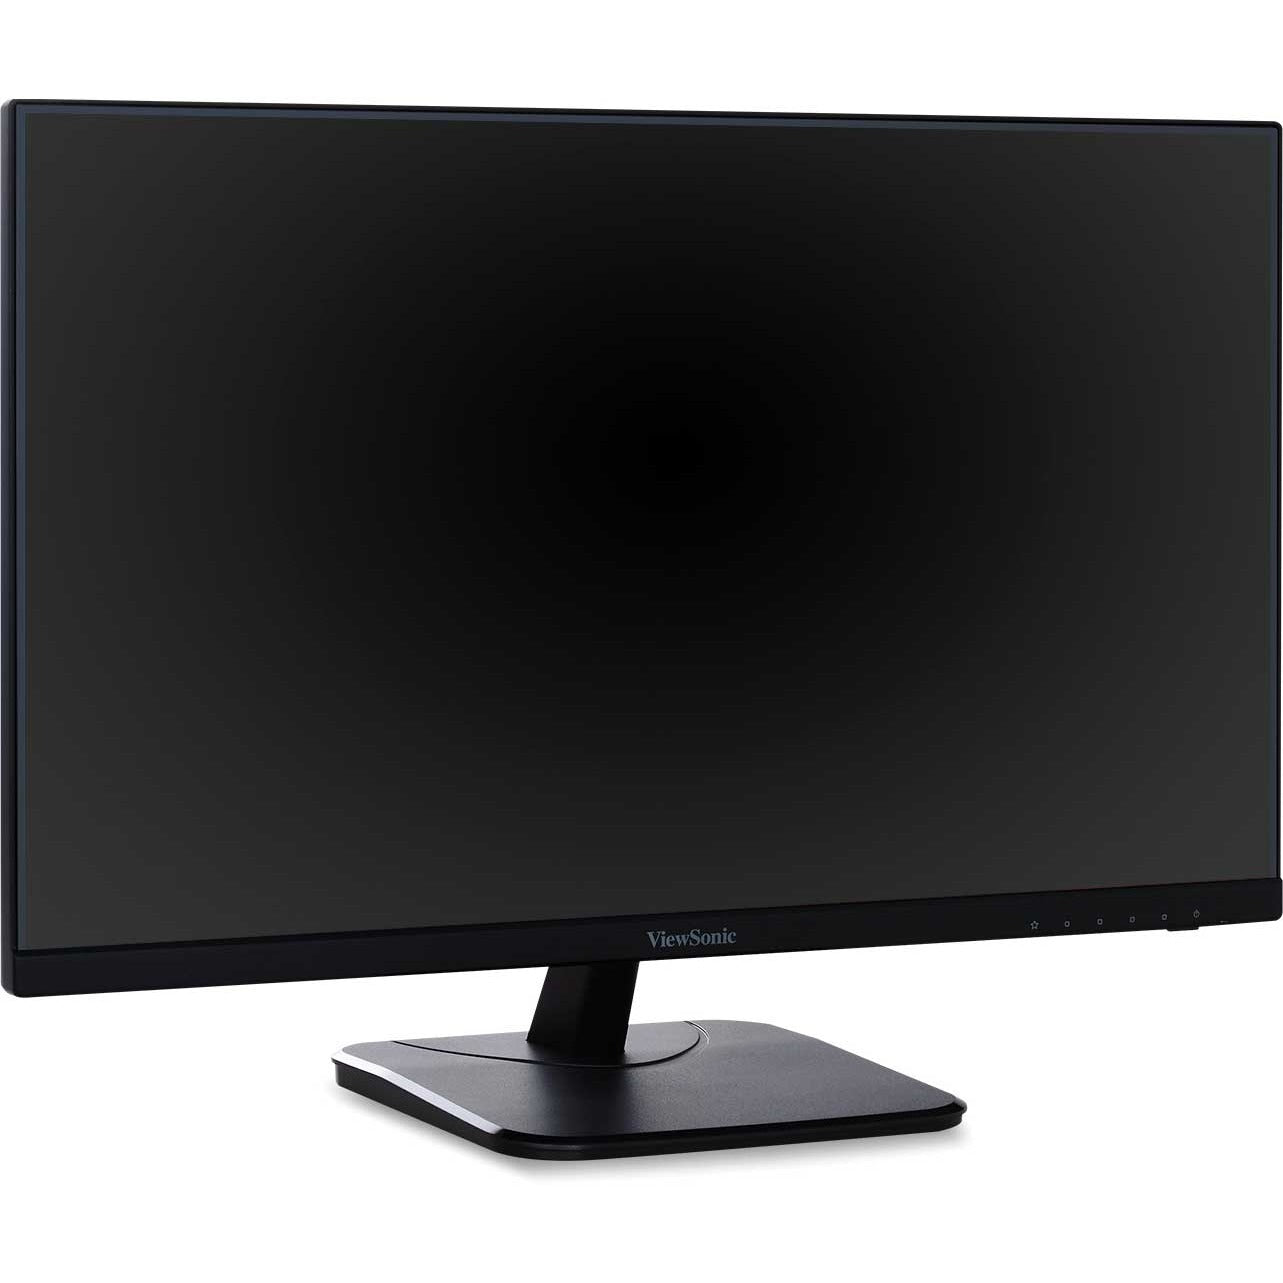 viewsonic-va2256-mhd-22-inch-ips-1080p-monitor-with-ultra-thin-bezels-hdmi-displayport-and-vga-inputs-for-home-and-office-va2256-mhd-ips-1080p-monitor-with-ultra-thin-bezels-hdmi-displayport-and-vga-250-cd-m2-22_vewva2256mhd - 5